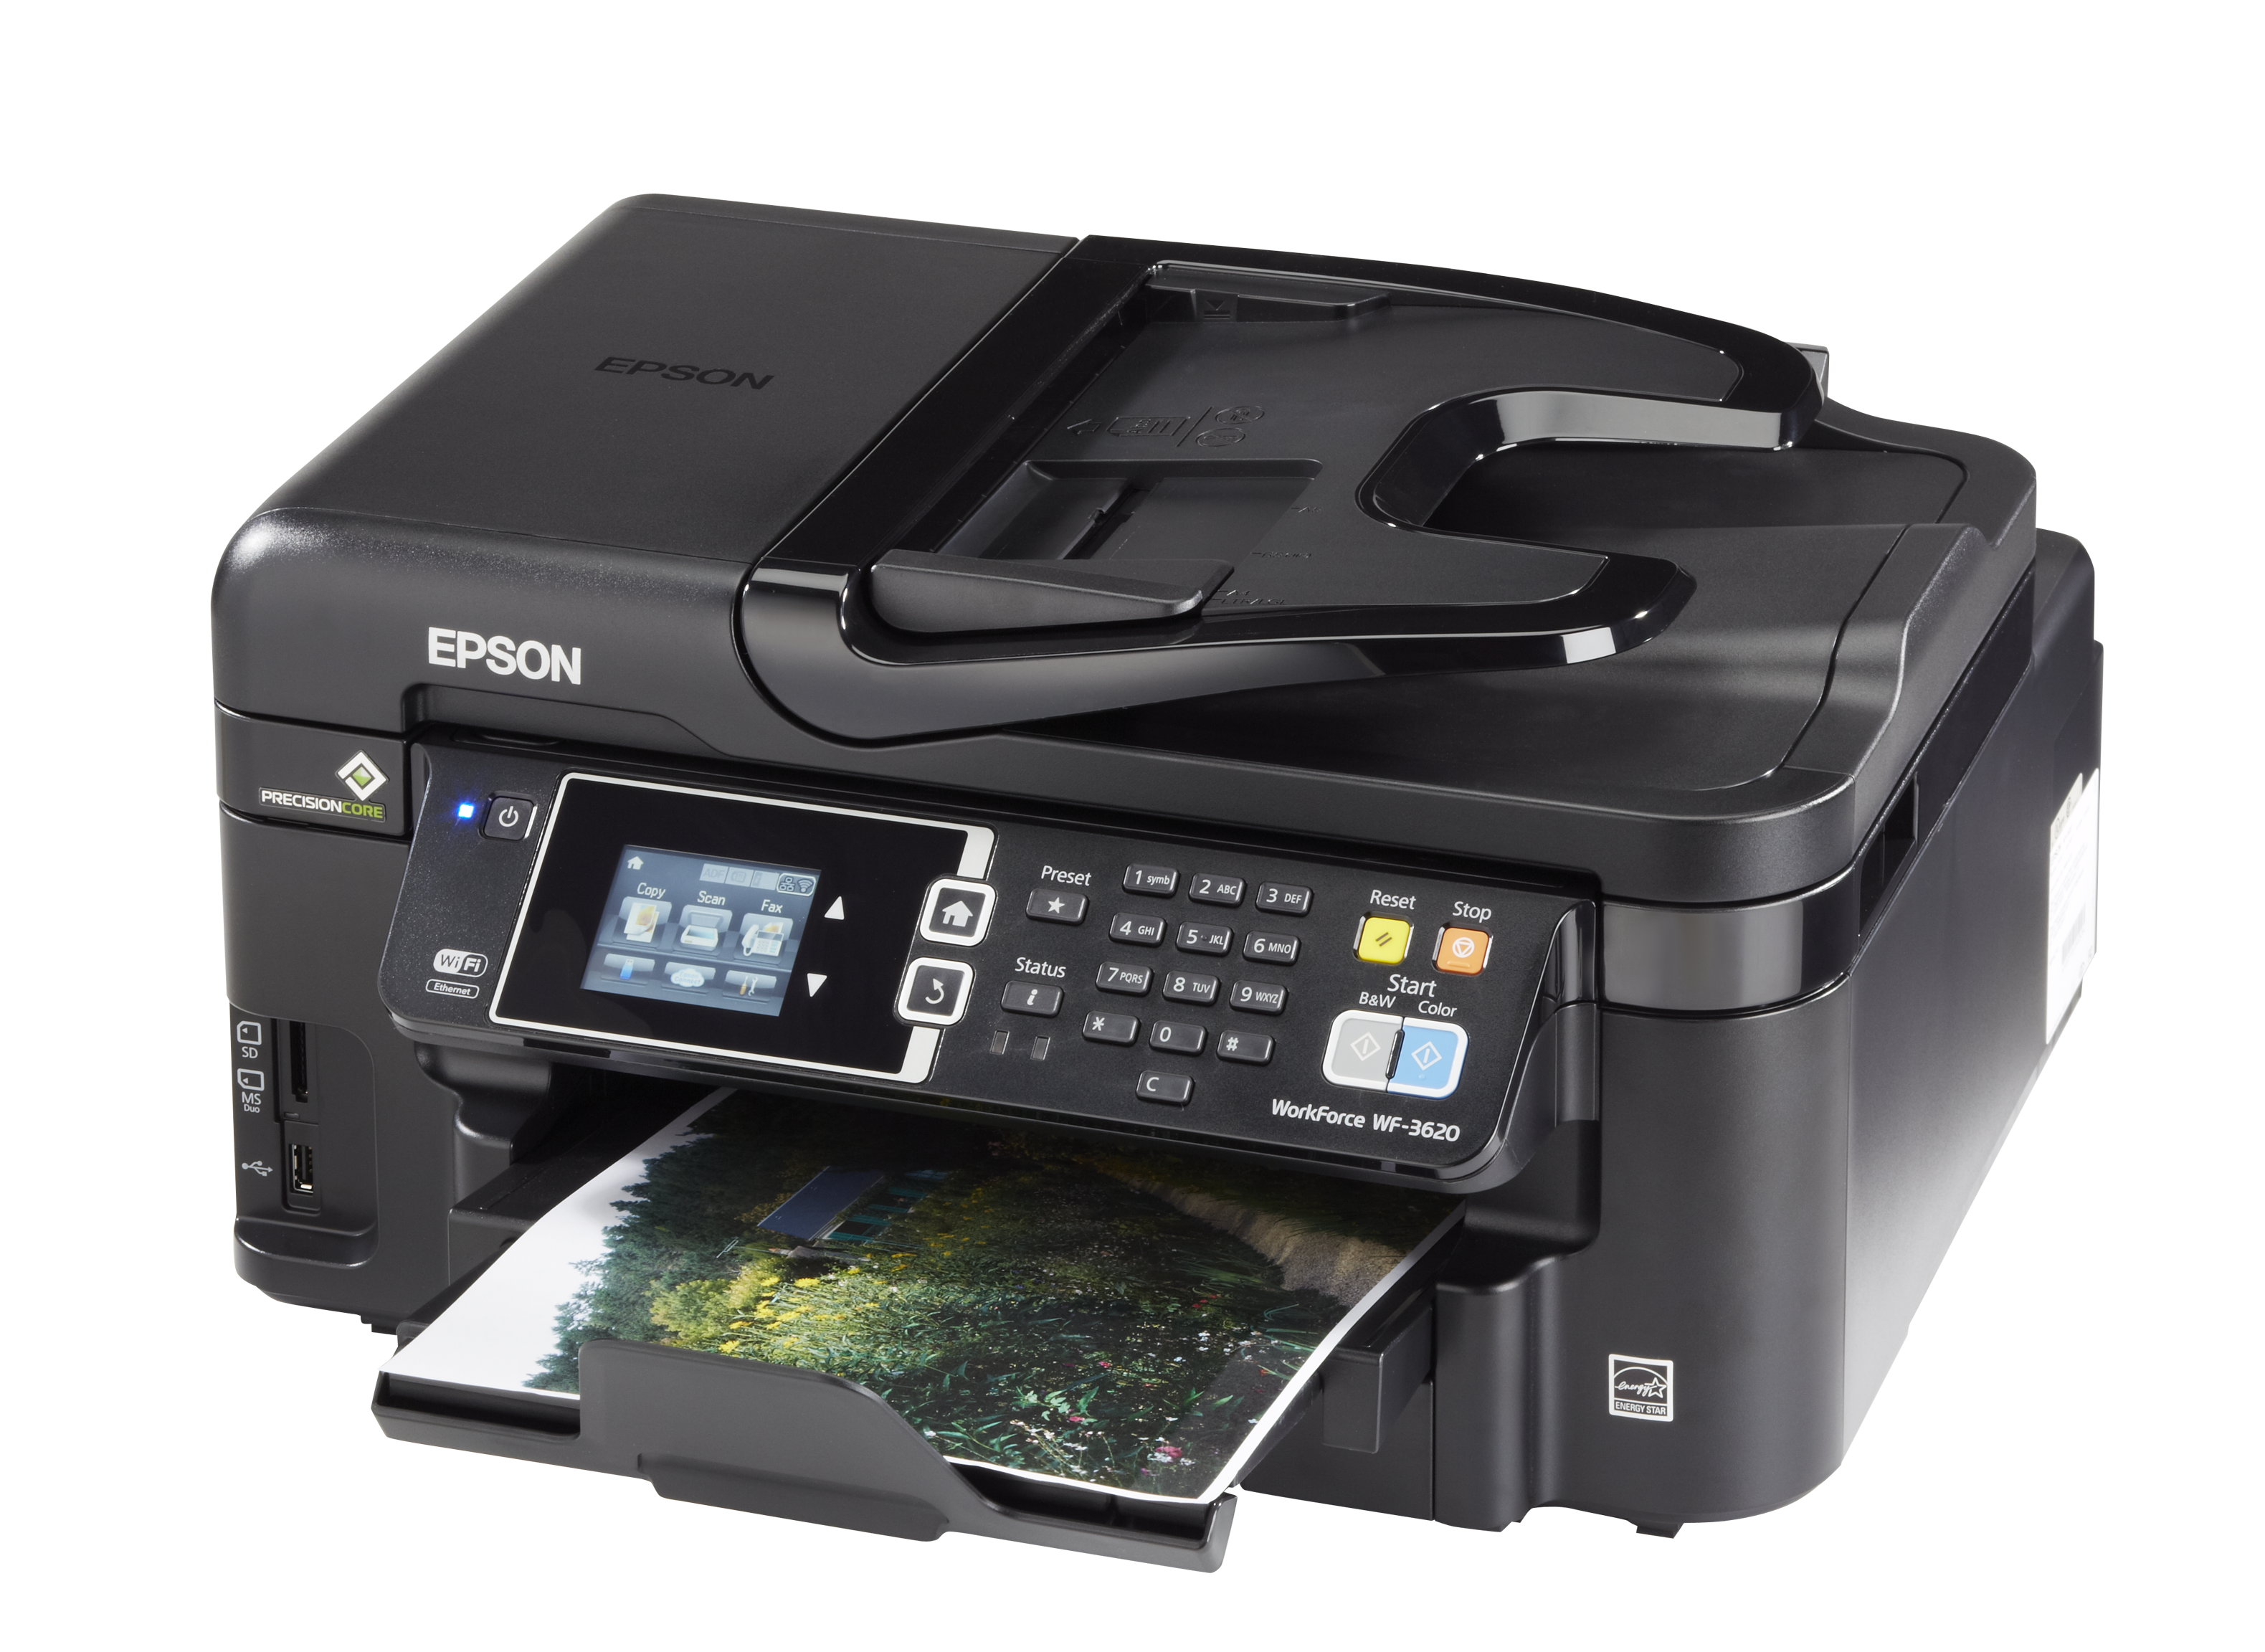 Epson Workforce WF-3620 Printer Review - Consumer Reports